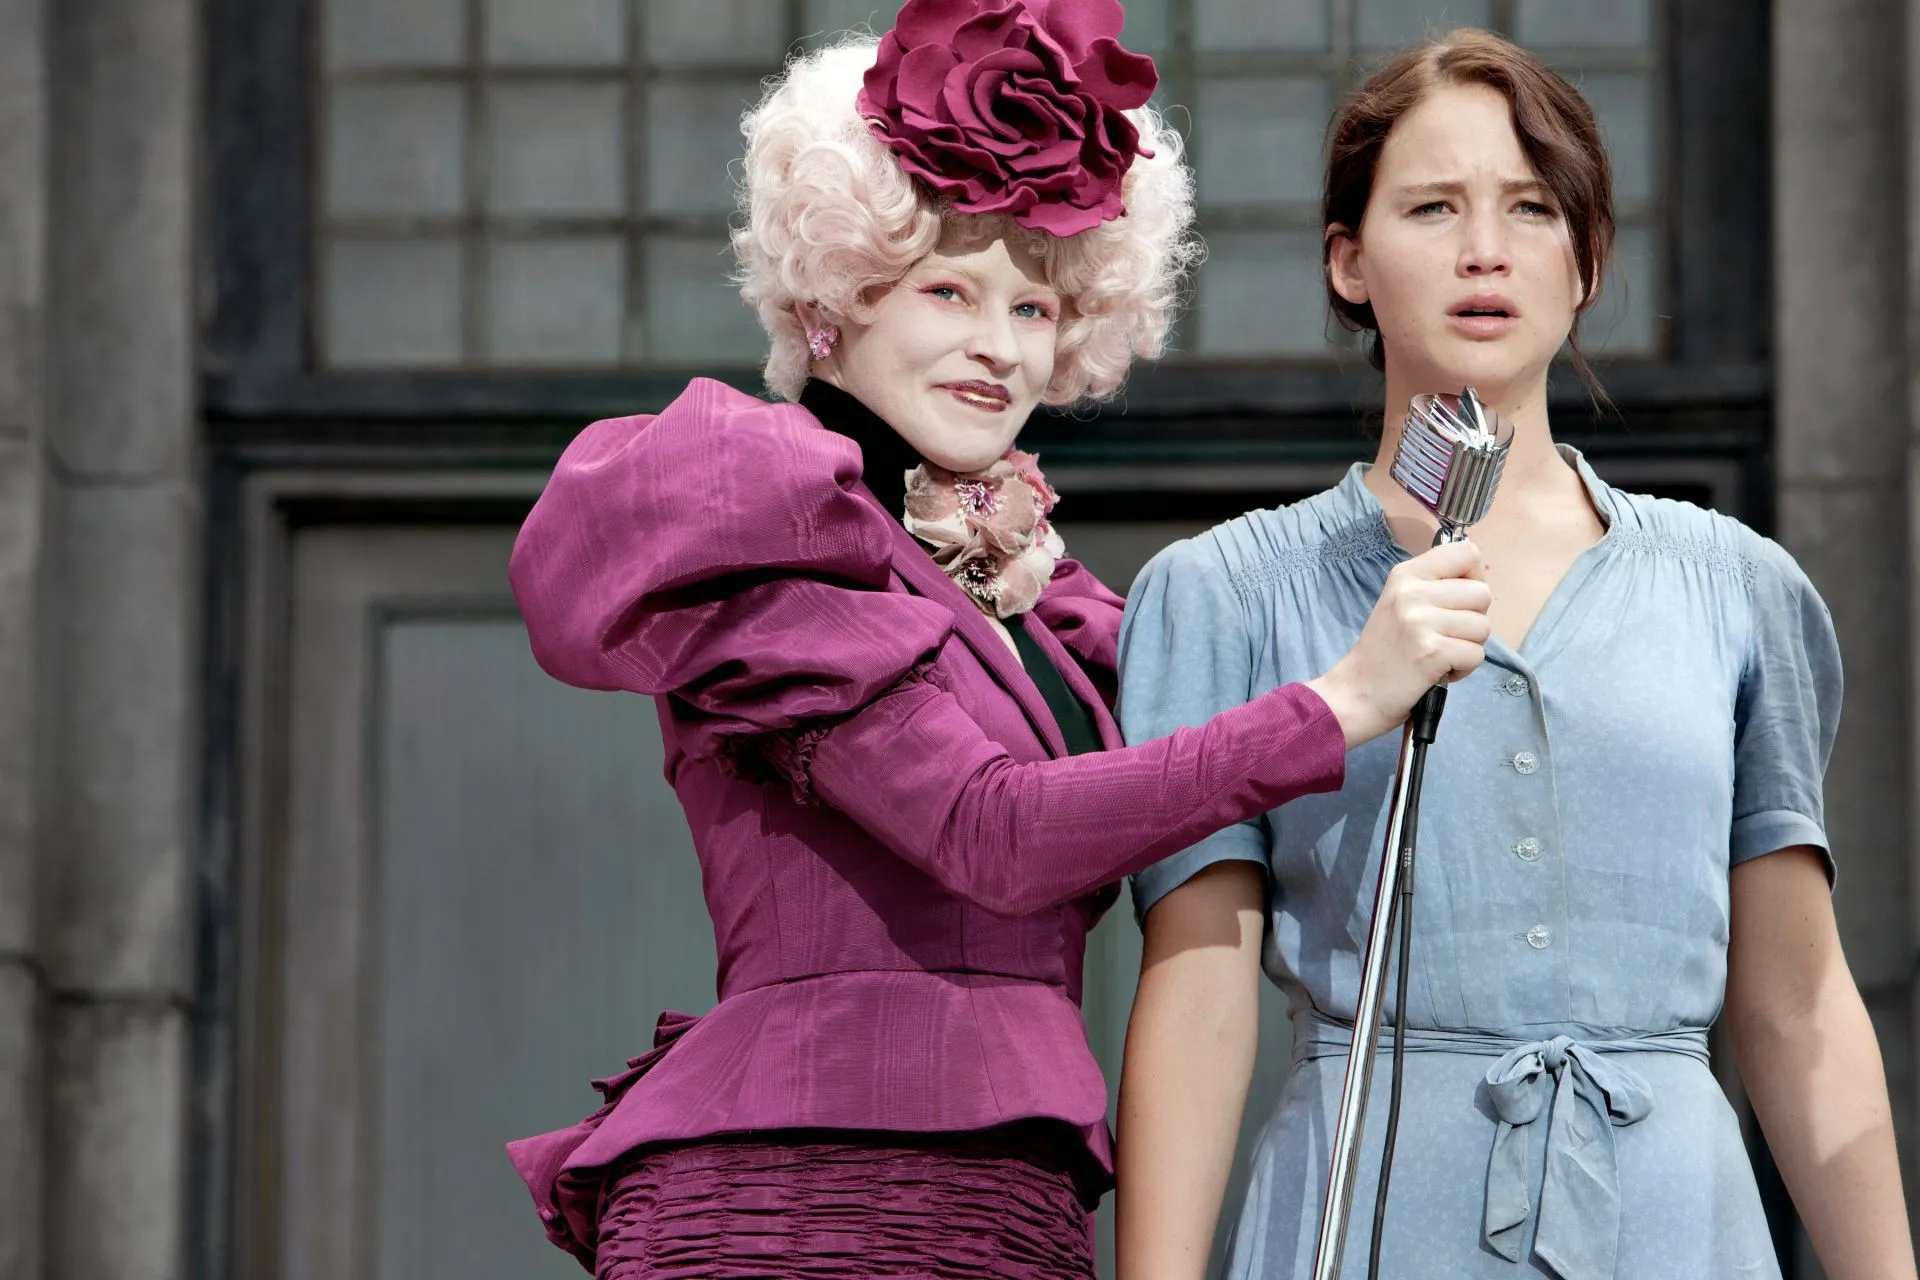 Screenshot from The Hunger Games. A plainly dressed woman (Katniss) stands next to an extravagantly dressed woman (Effie Trinket) in front of a microphone